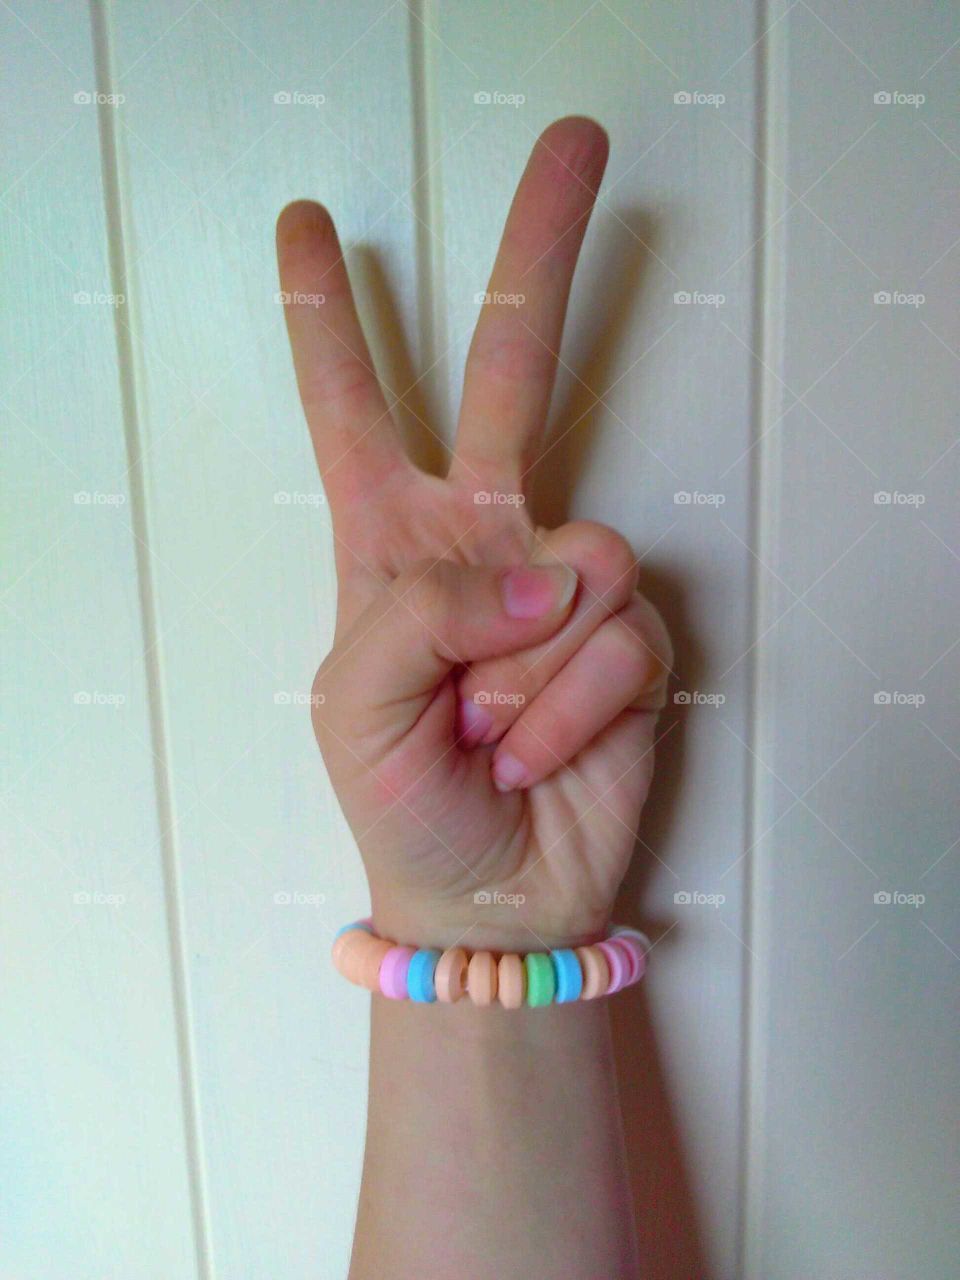 peace sign with a candy bracelet